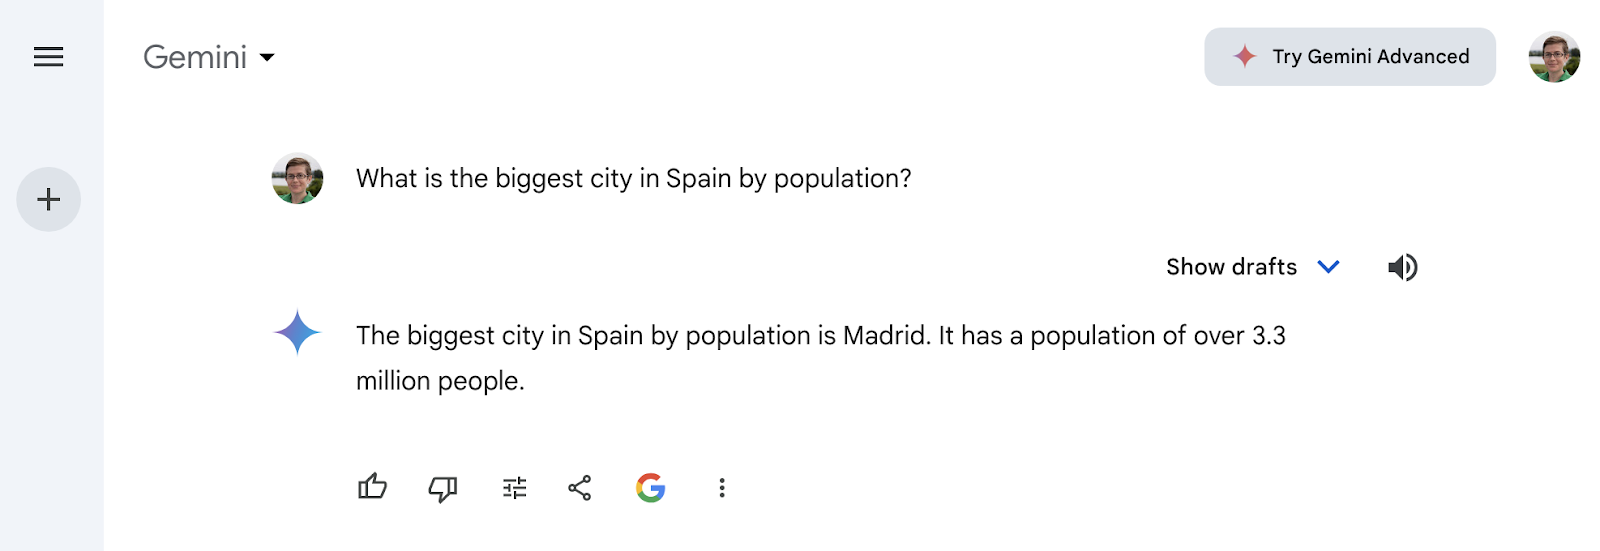 Gemini chatbot response to the question 'What is the biggest city in Spain by population?'